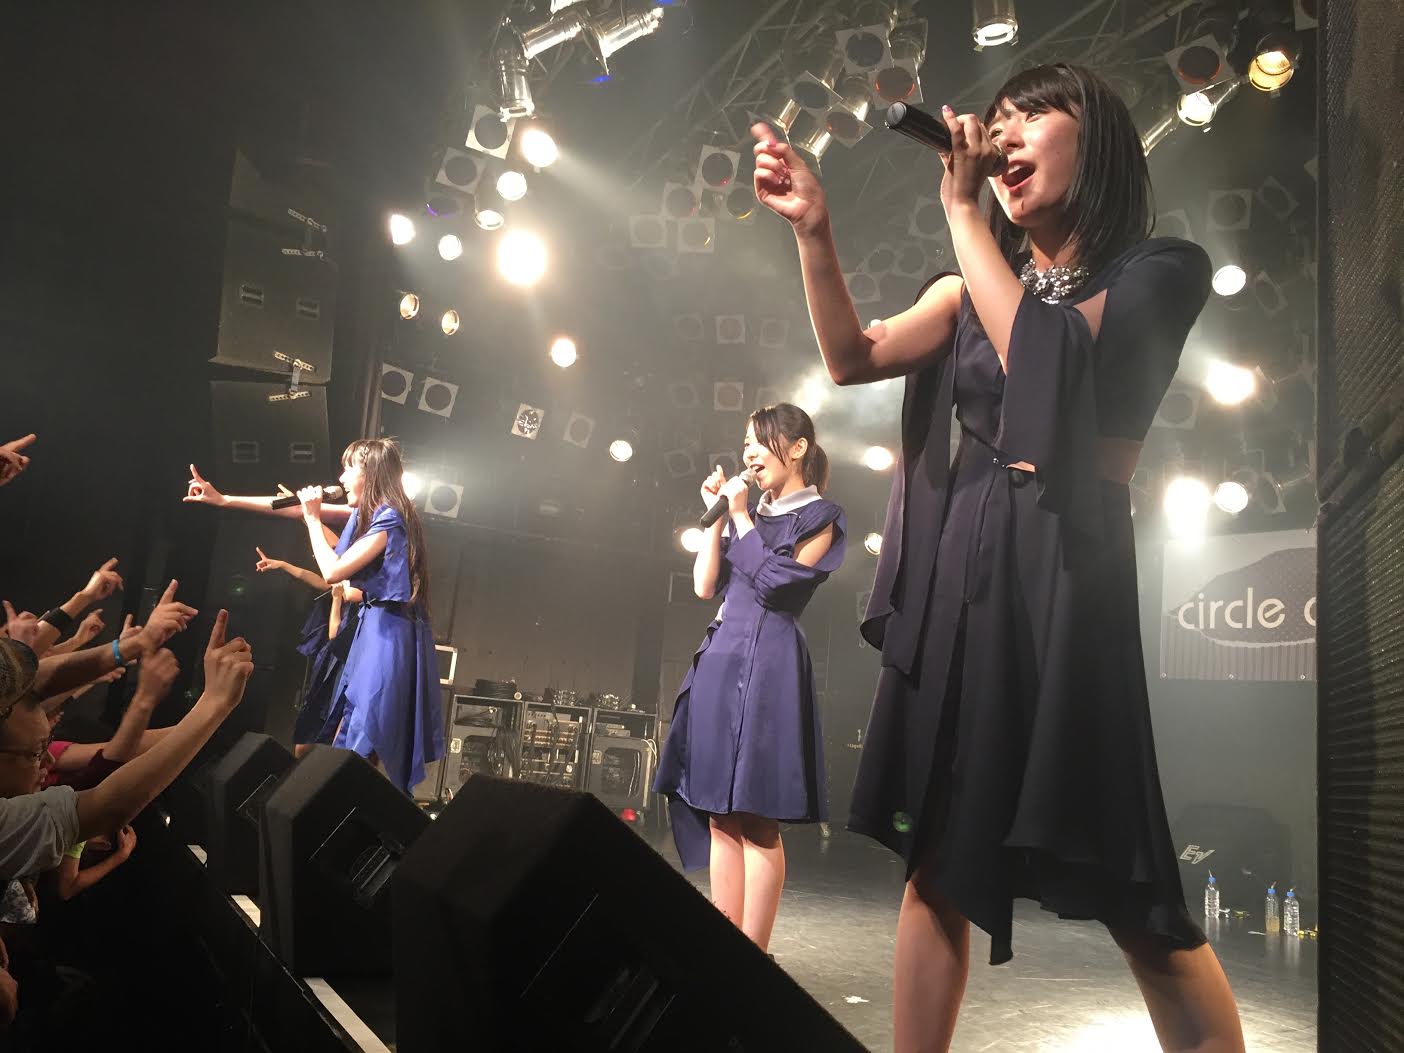 Dorothy Little Happy Circle Japan During Their Winter Tour to Promote “Circle of the World” Mini-Album